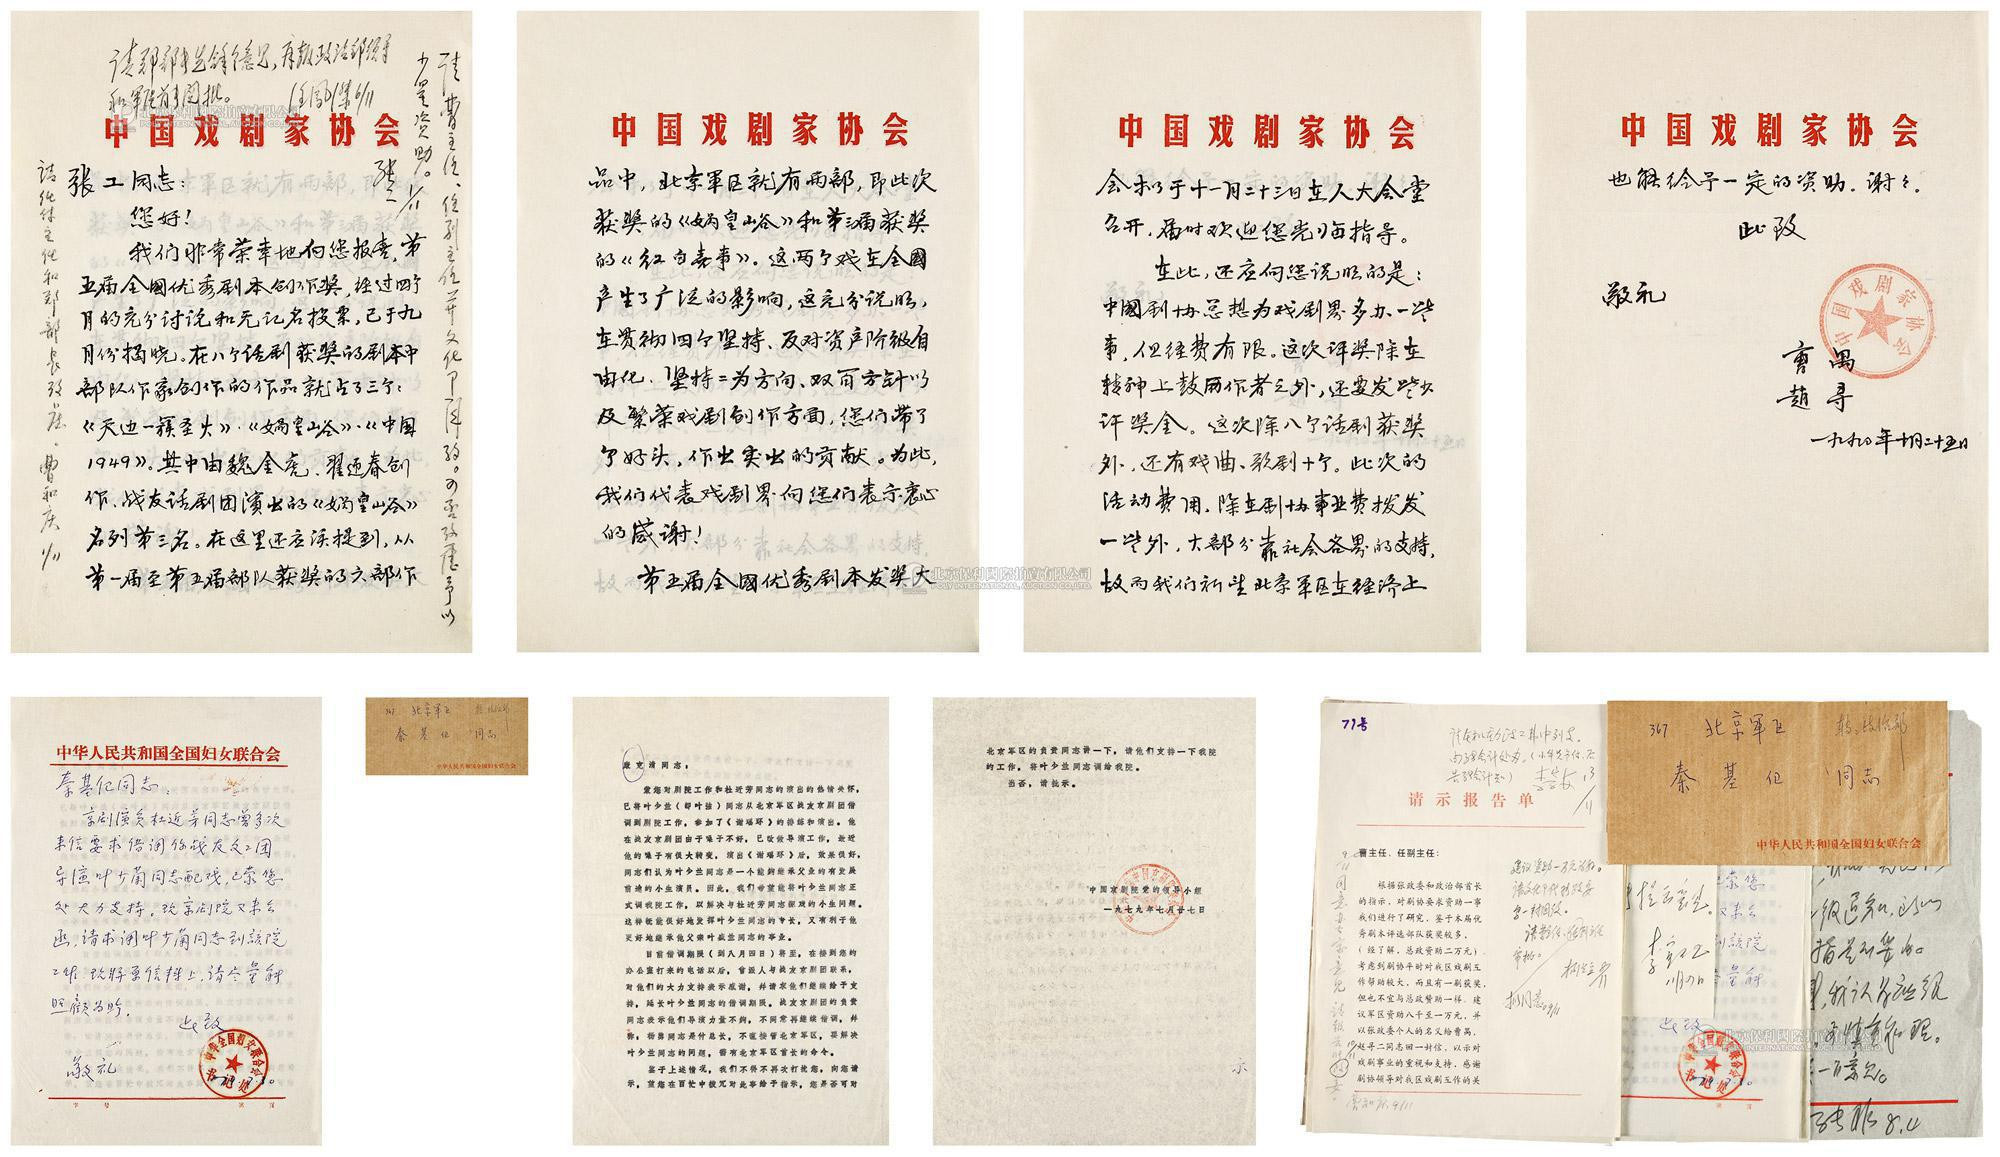 Two letters by Cao Yu and Kang Keqing， with a group of relevant documents and materials from Beijing Military Region